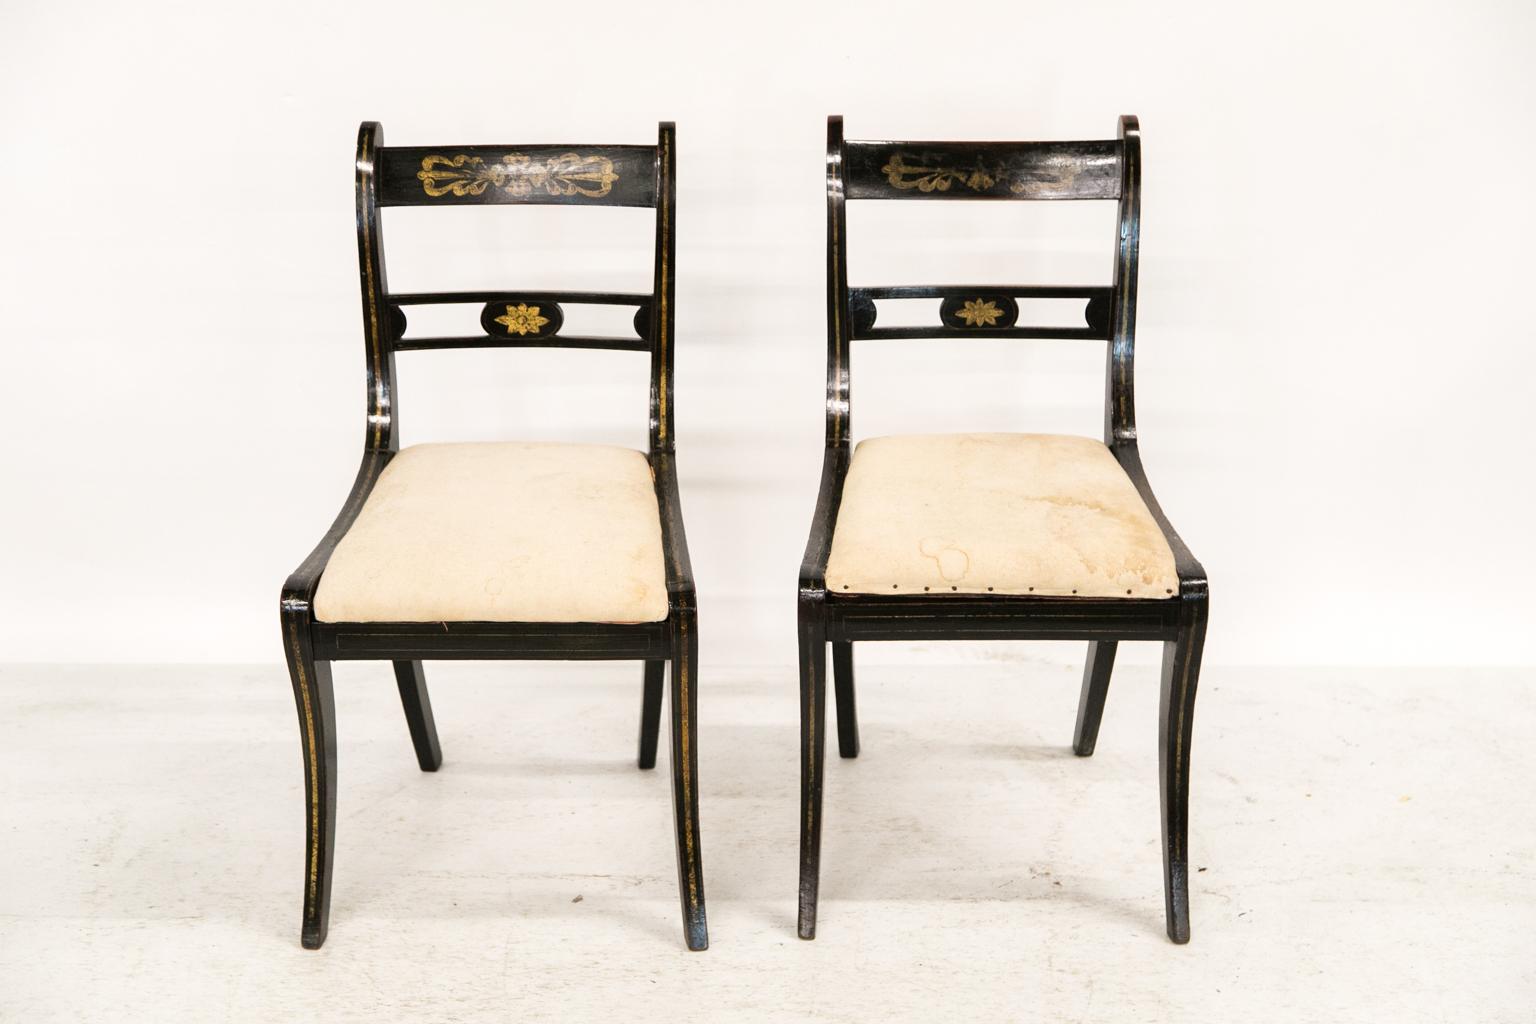 This pair of Regency side chairs has a pierced center cross splat with a floral starburst medallion in the center. The back stiles, seat frames, and front legs have a sweeping gold 1/4